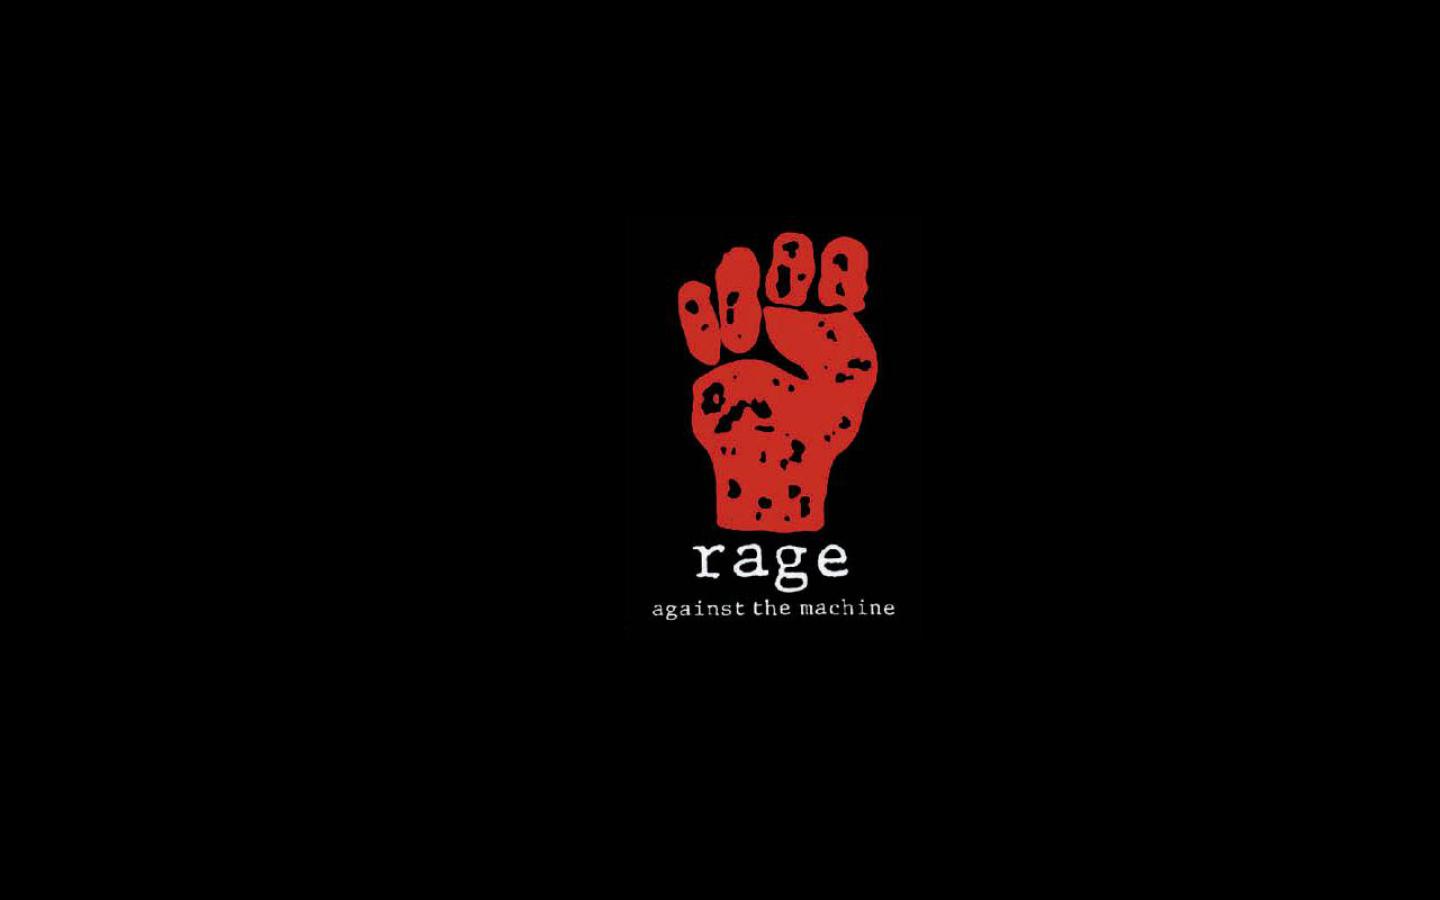 Band Rage Against The Machine Wallpaper More